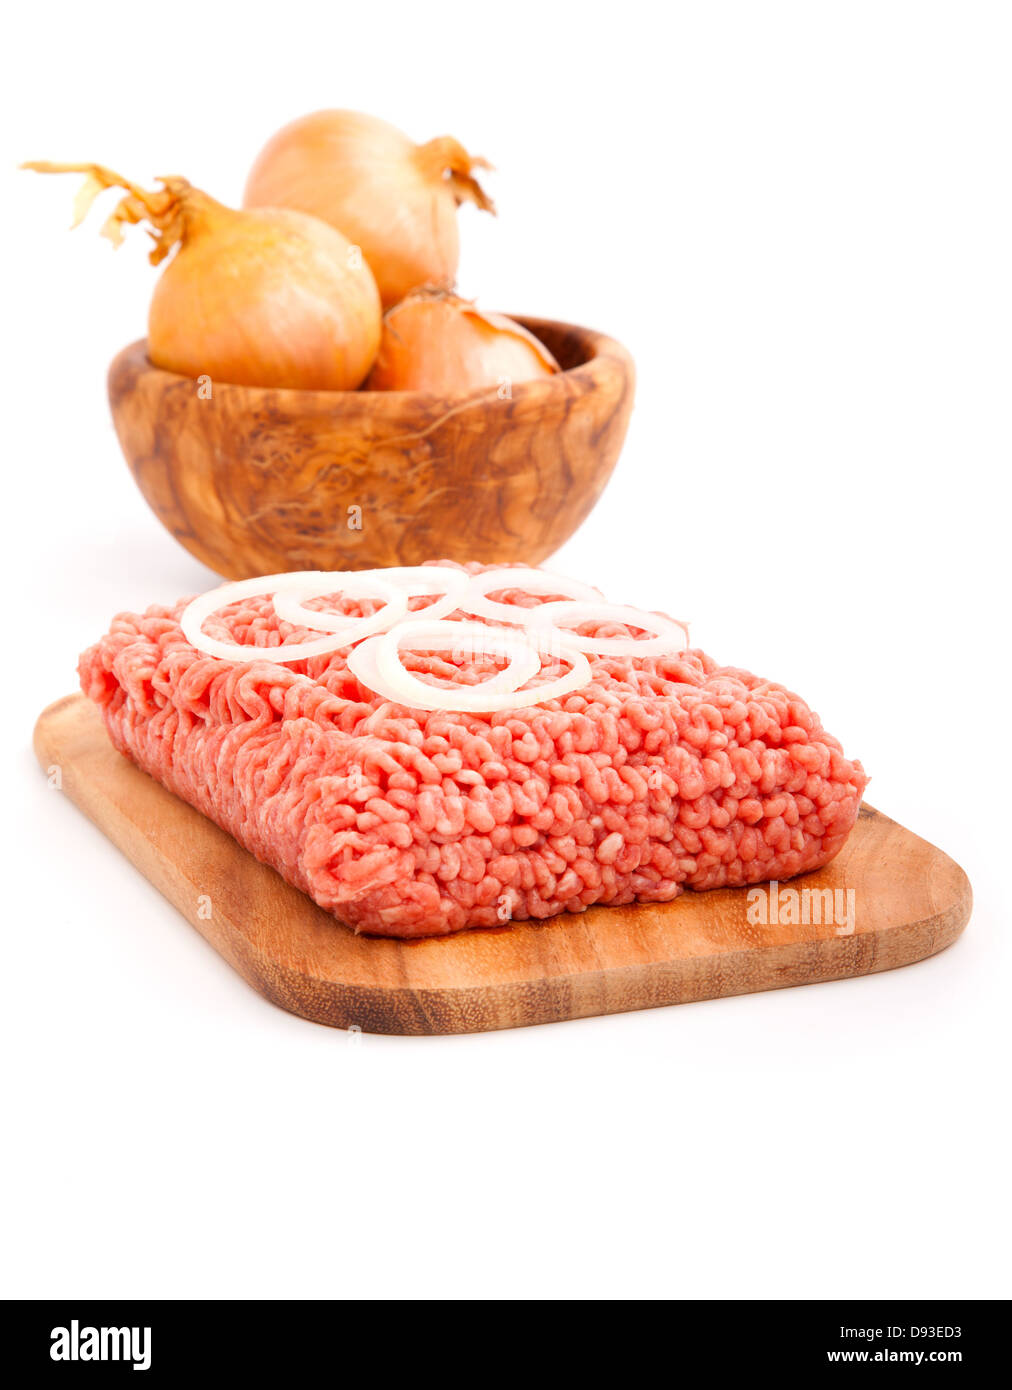 Minced meat isolated over white background Stock Photo